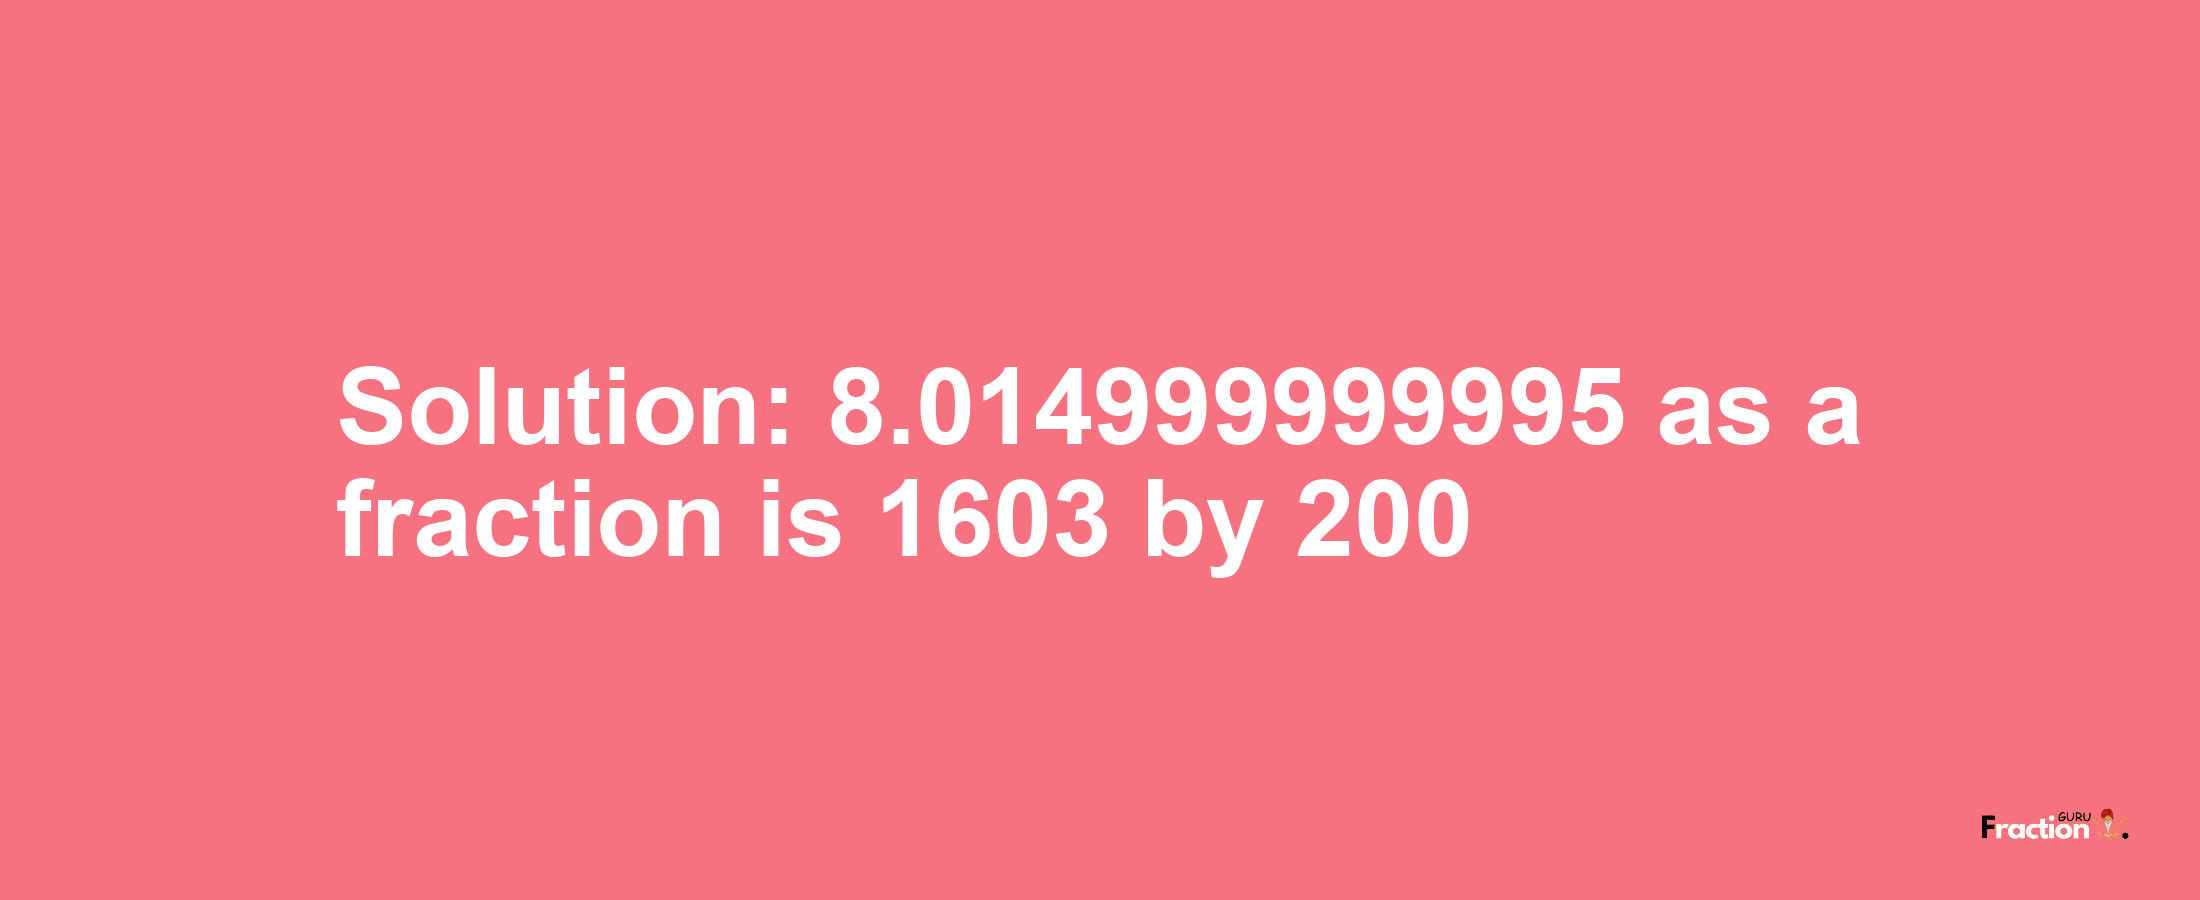 Solution:8.014999999995 as a fraction is 1603/200